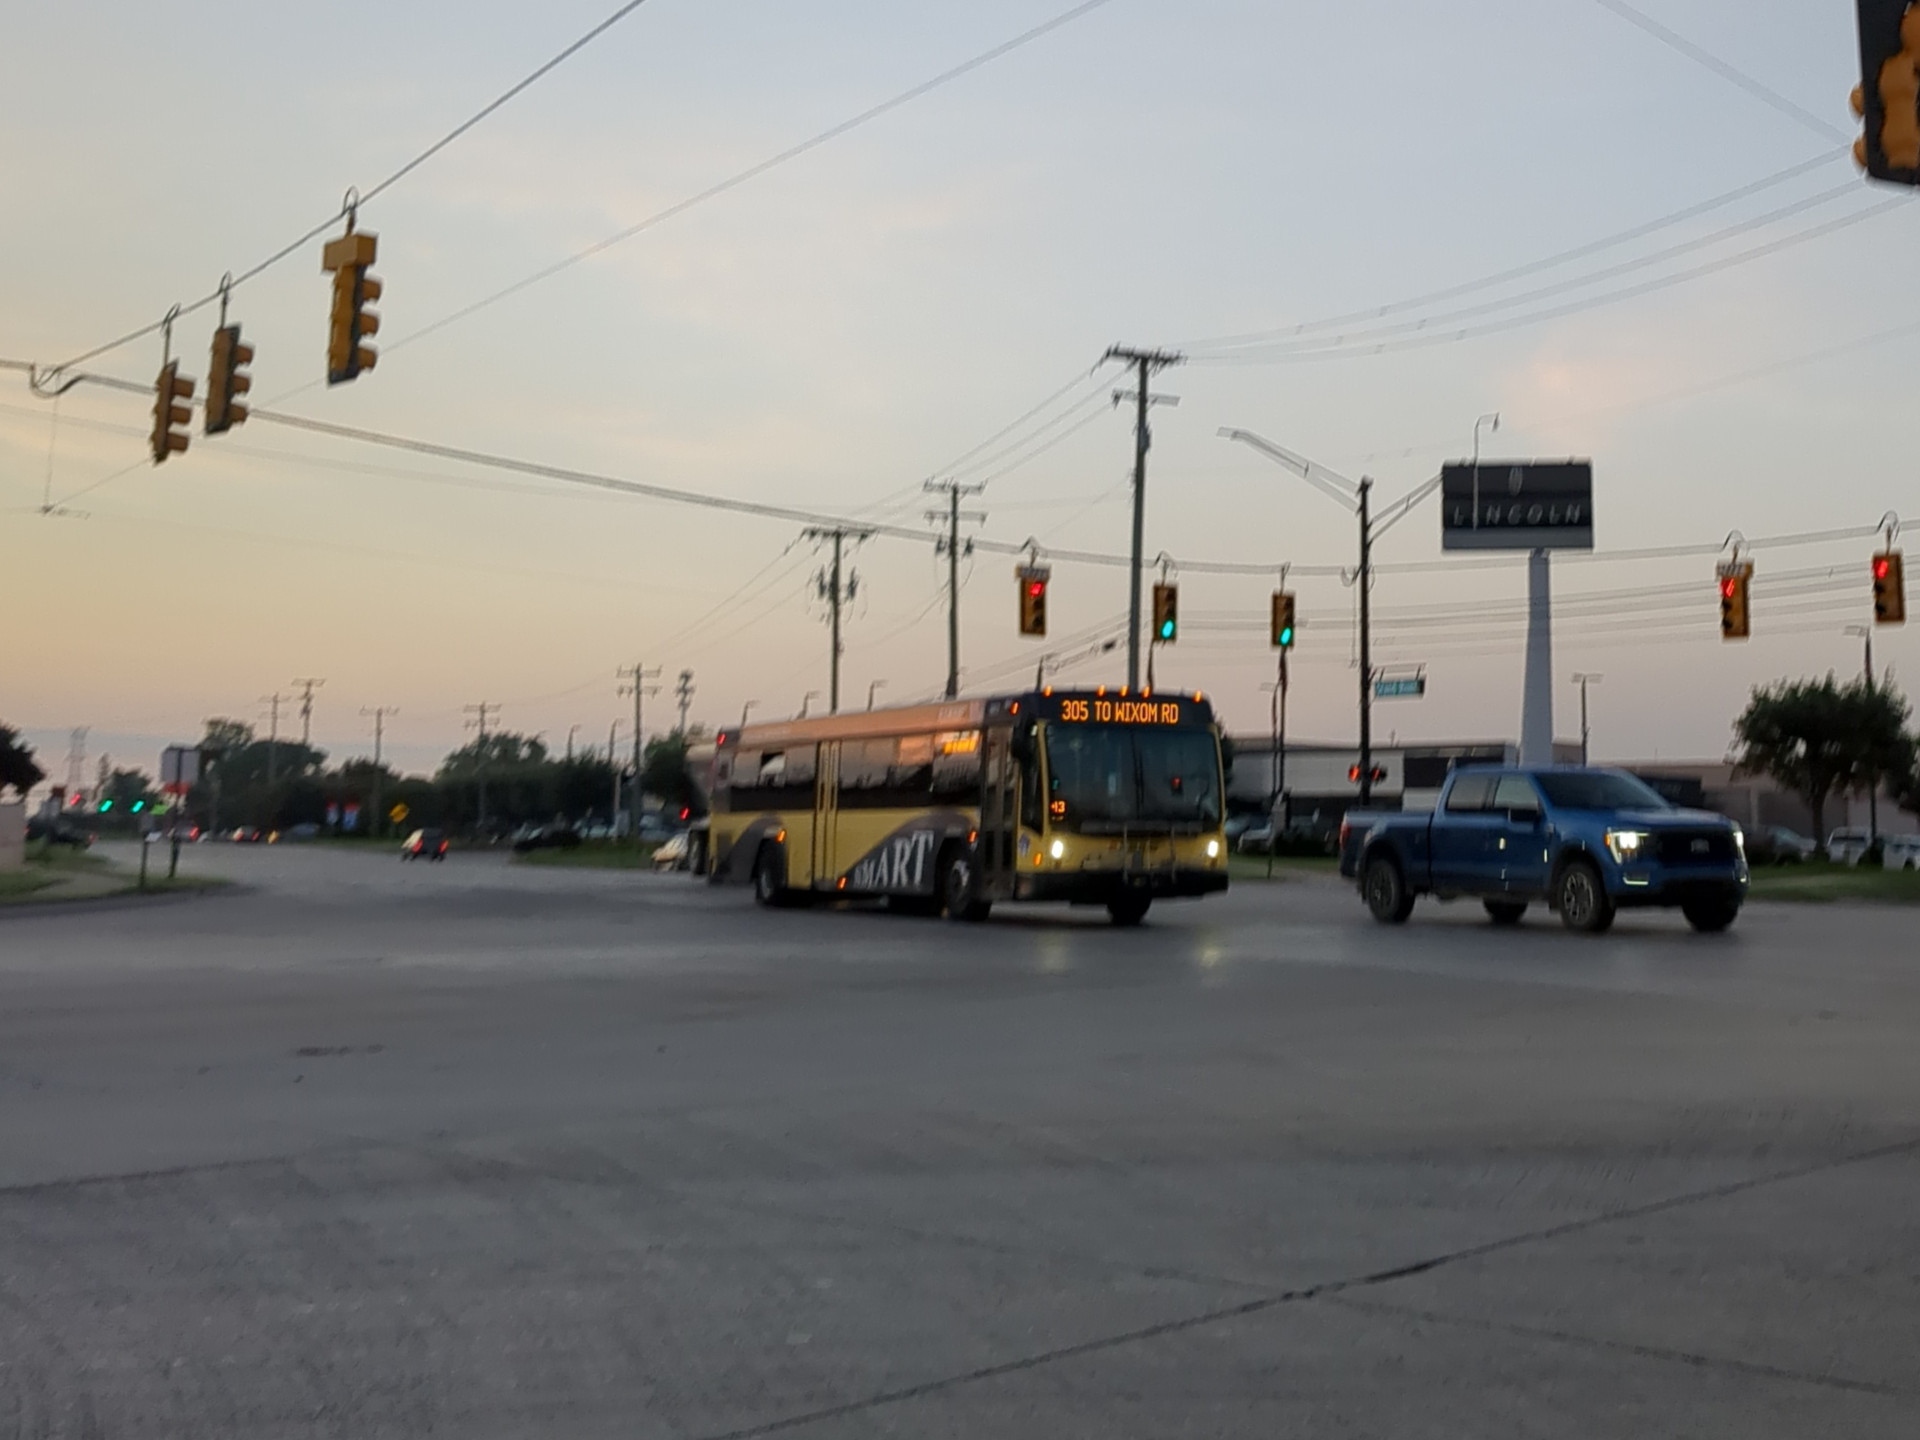 A 305 Grand River bus crossing Wixom Road